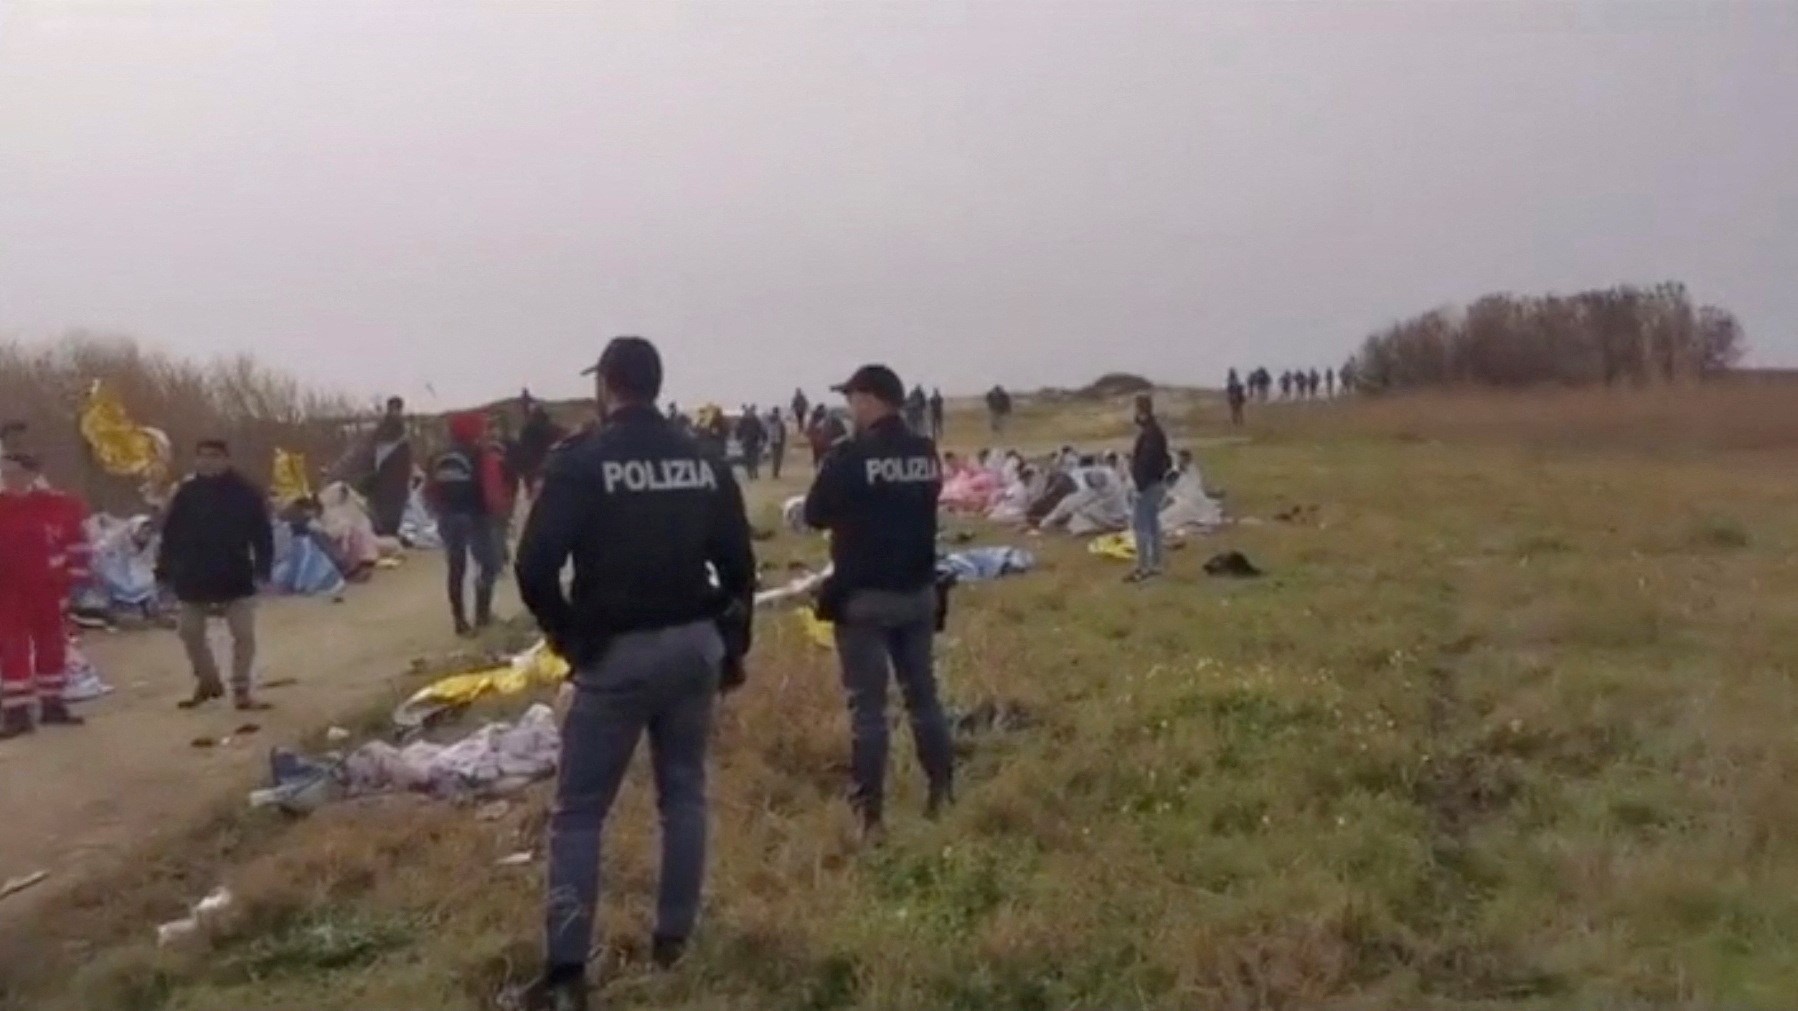 A screengrab taken from a video shows police officers standing at the beach where bodies of believed to be refugees were found after a shipwreck, in Cutro, the eastern coast of Italy's Calabria region, Italy, February 26, 2023. Photo: Reuters